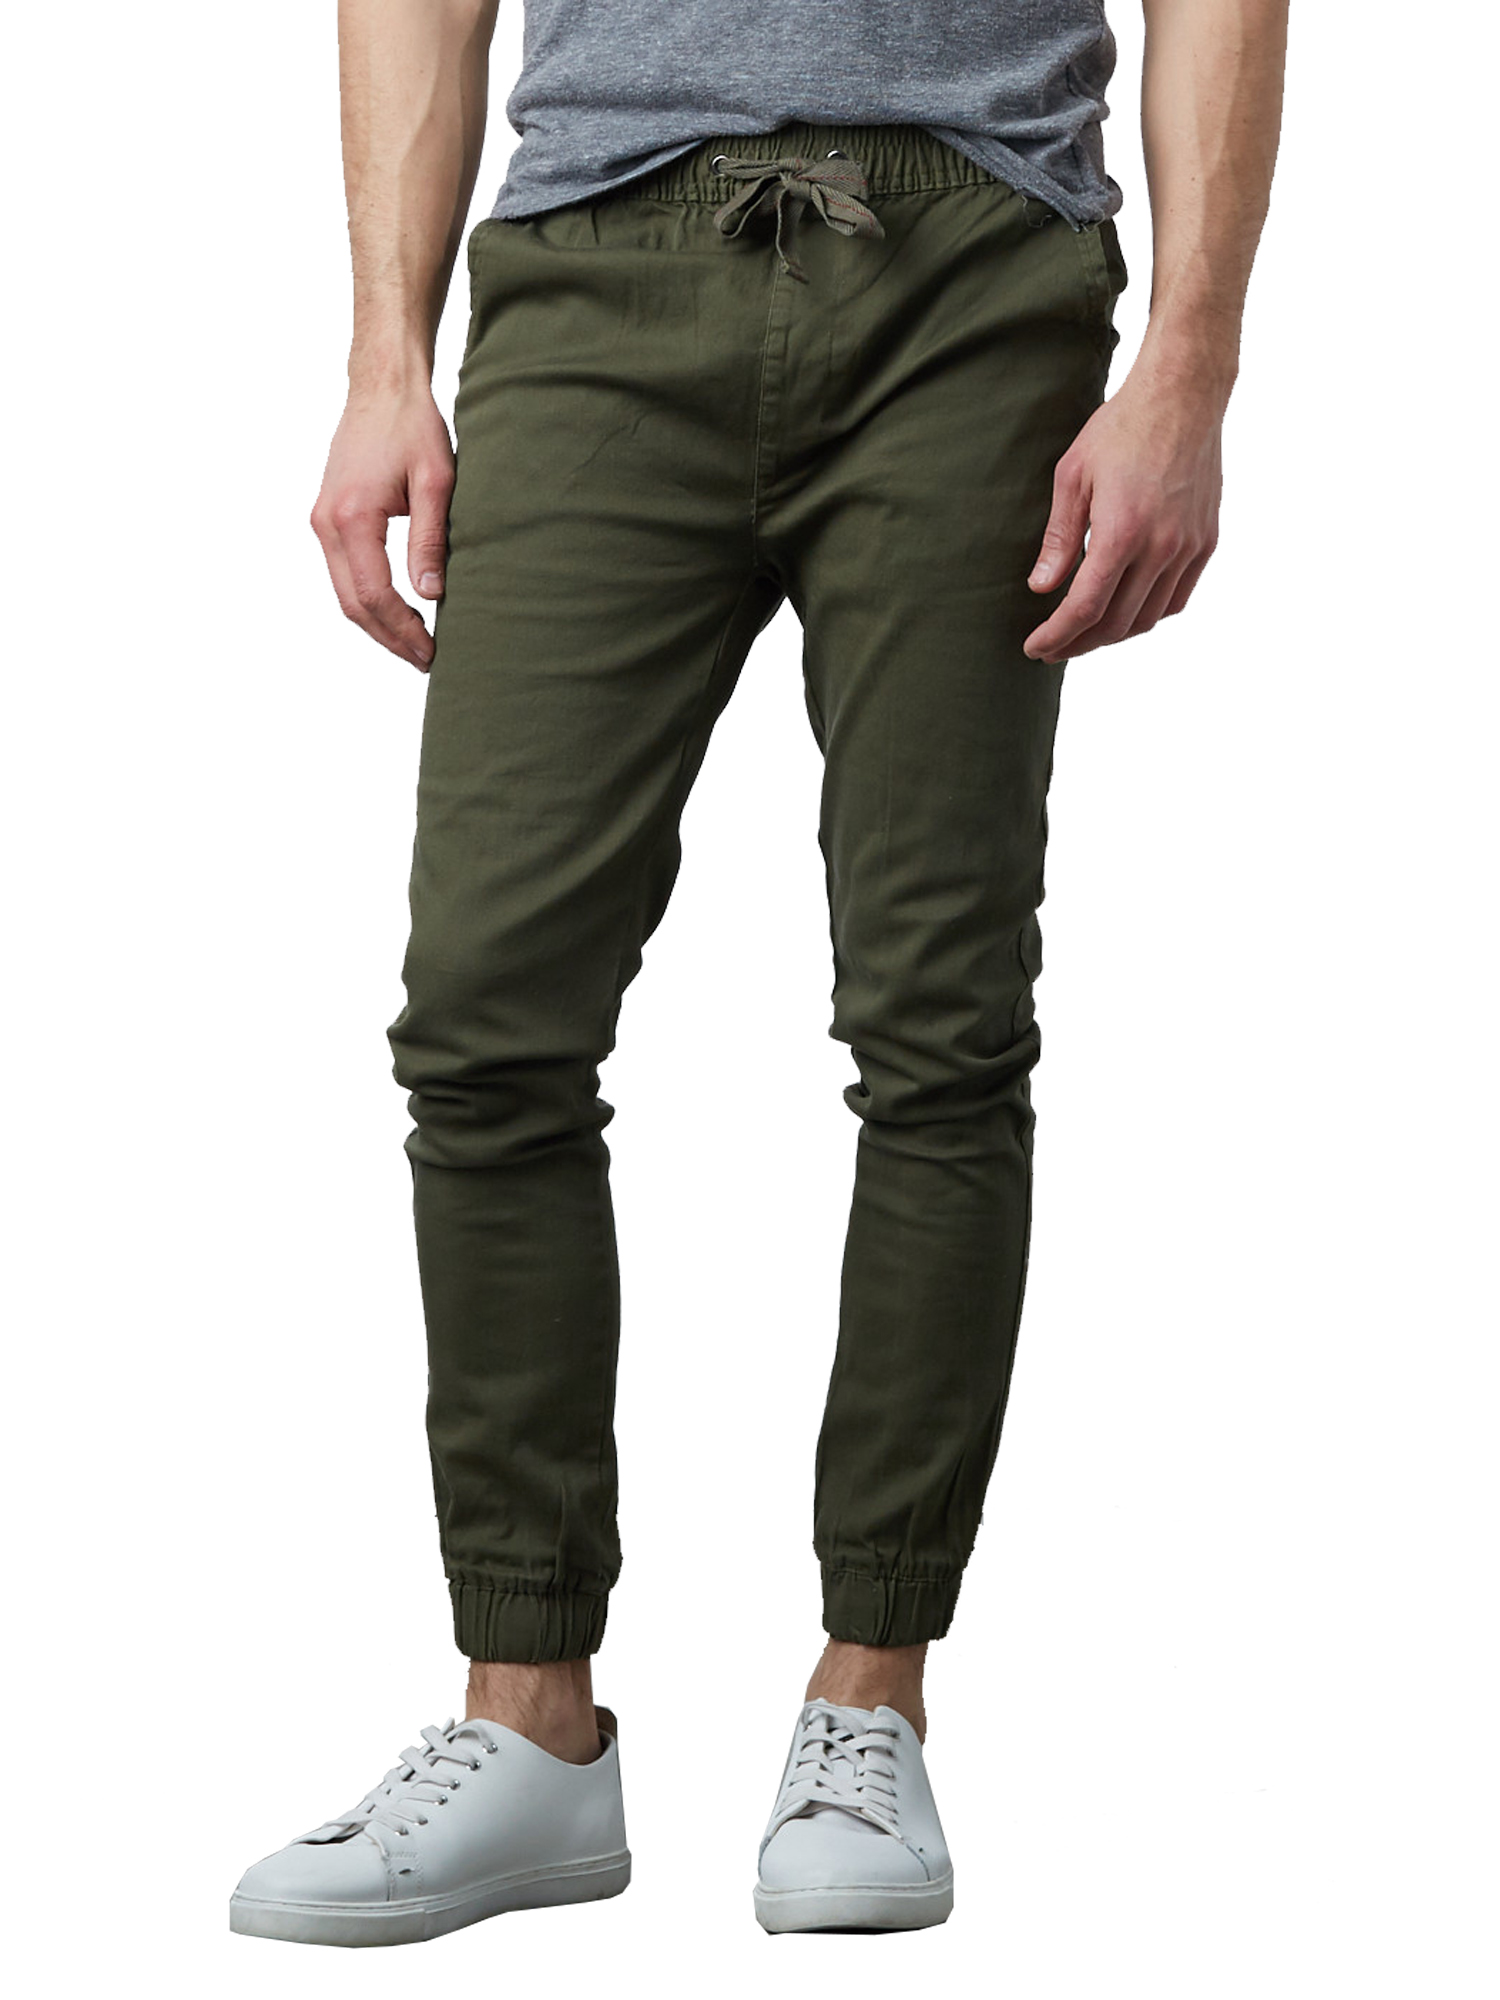 2-Pack Mens Slim-Fit Cotton Twill Jogger Pants (S-2XL) - image 2 of 13